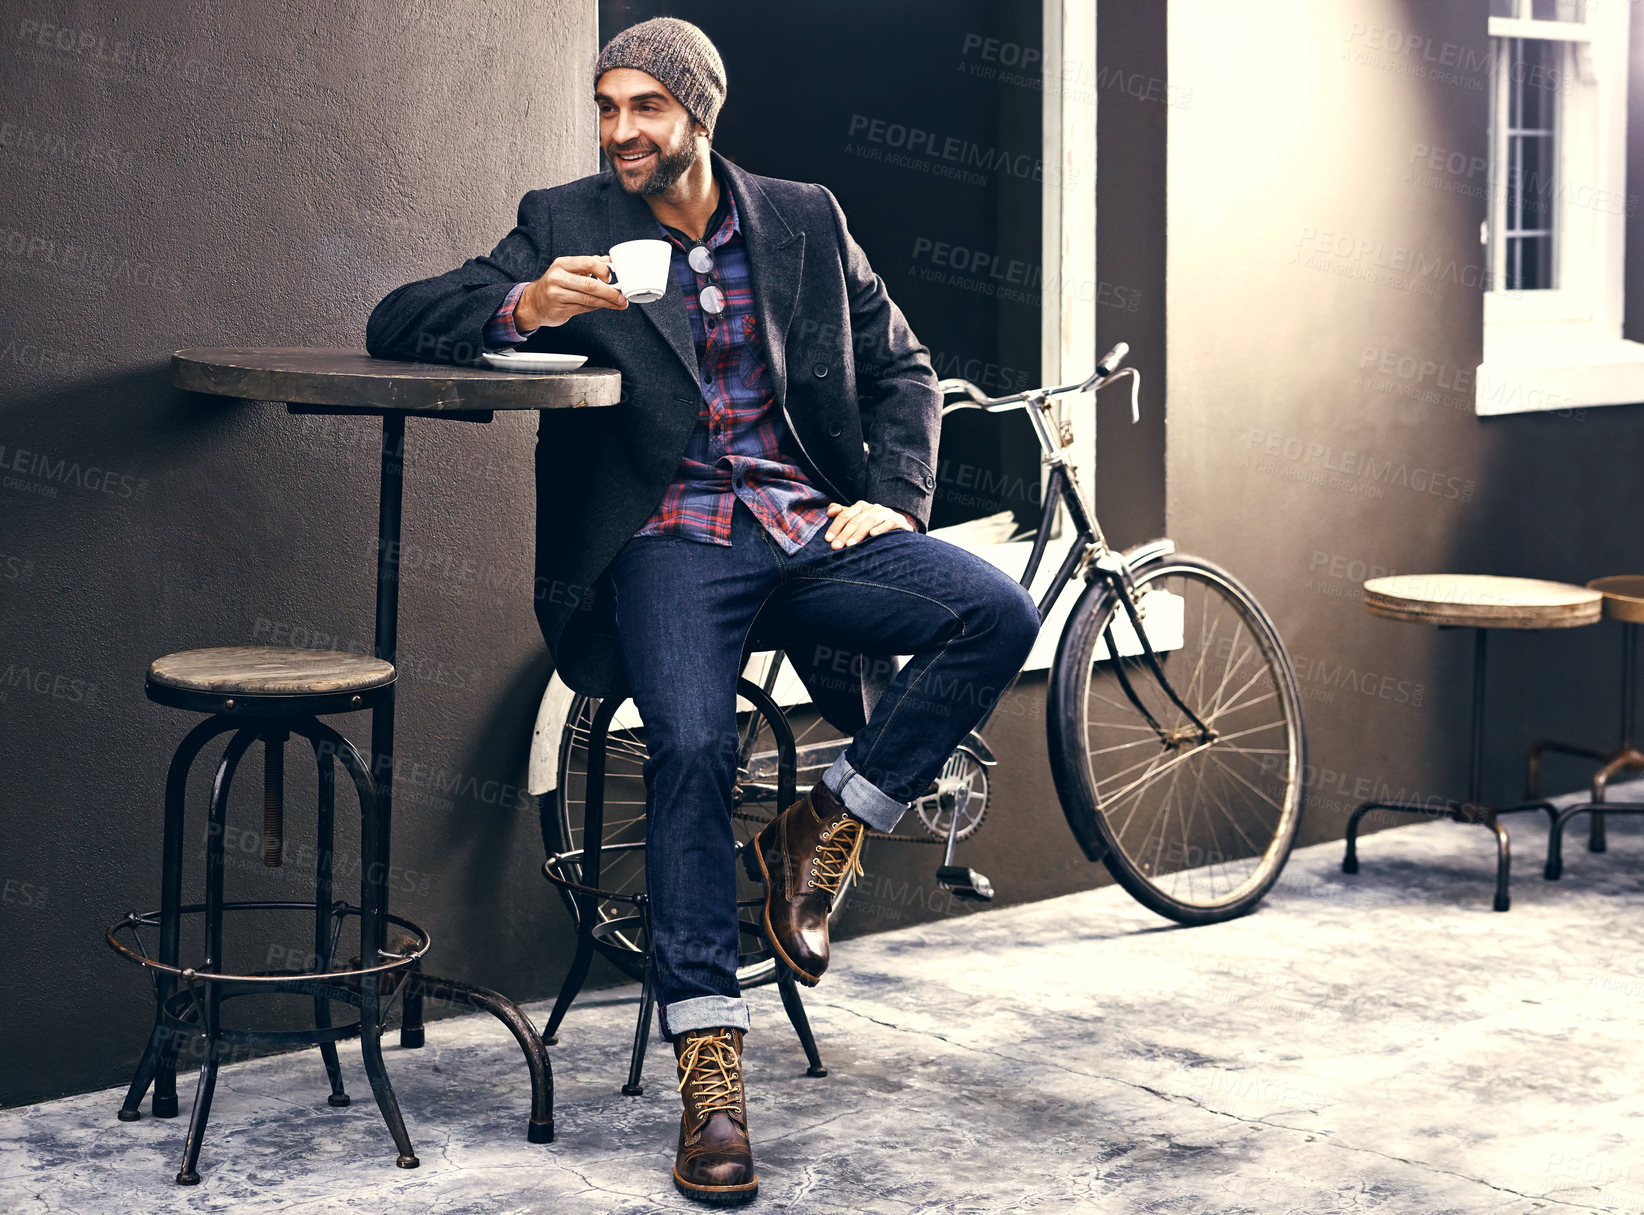 Buy stock photo Shot of a handsome young man enjoying a cup of coffee at a cafe in the city while his bike stands next to him